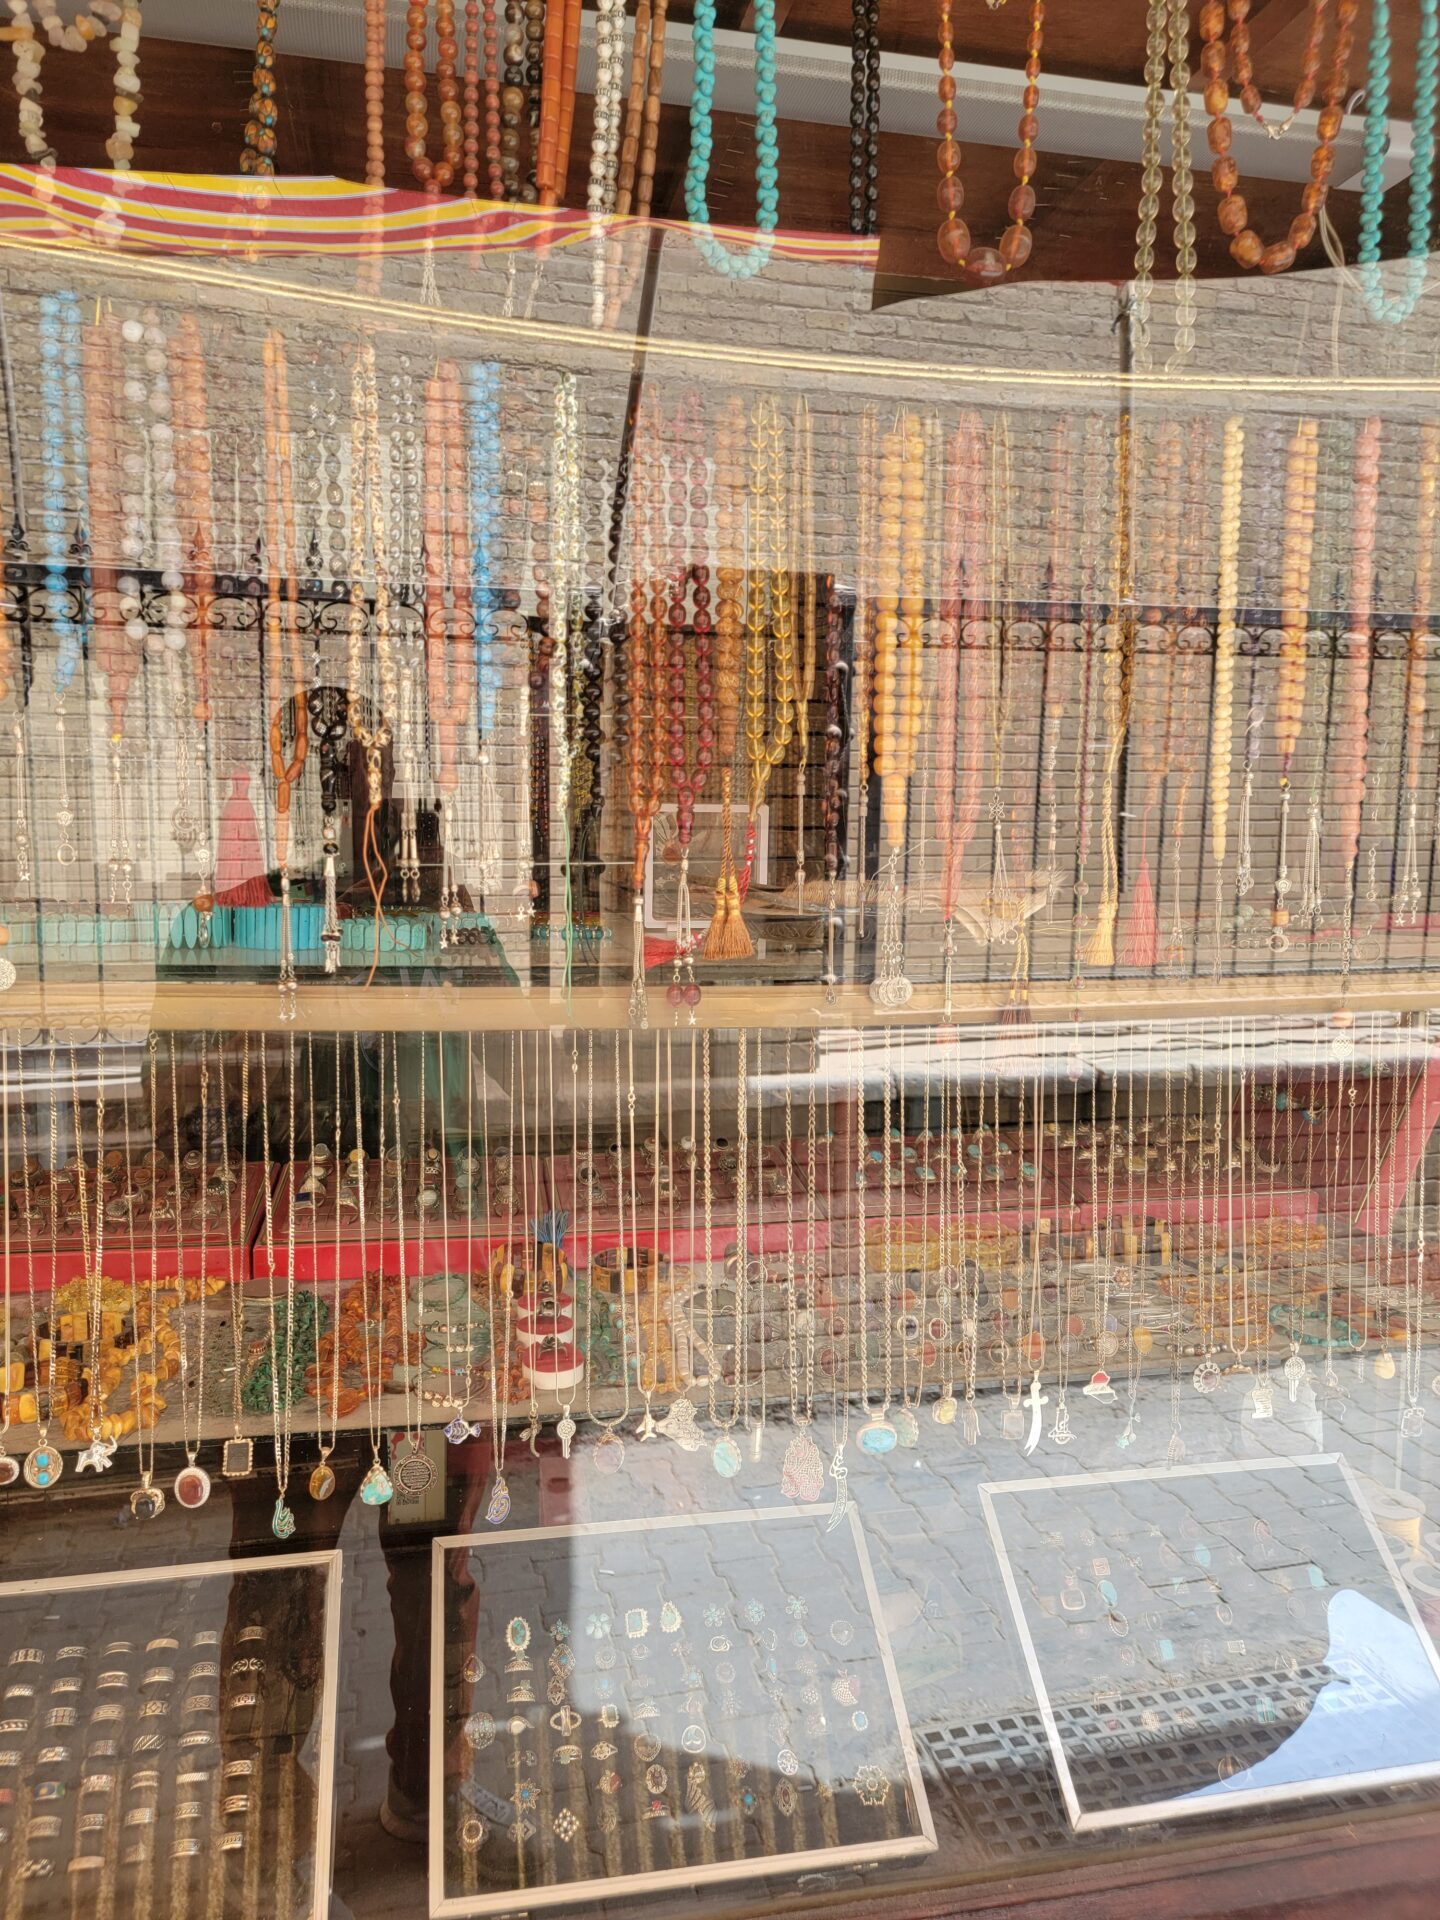 a display of necklaces in a store